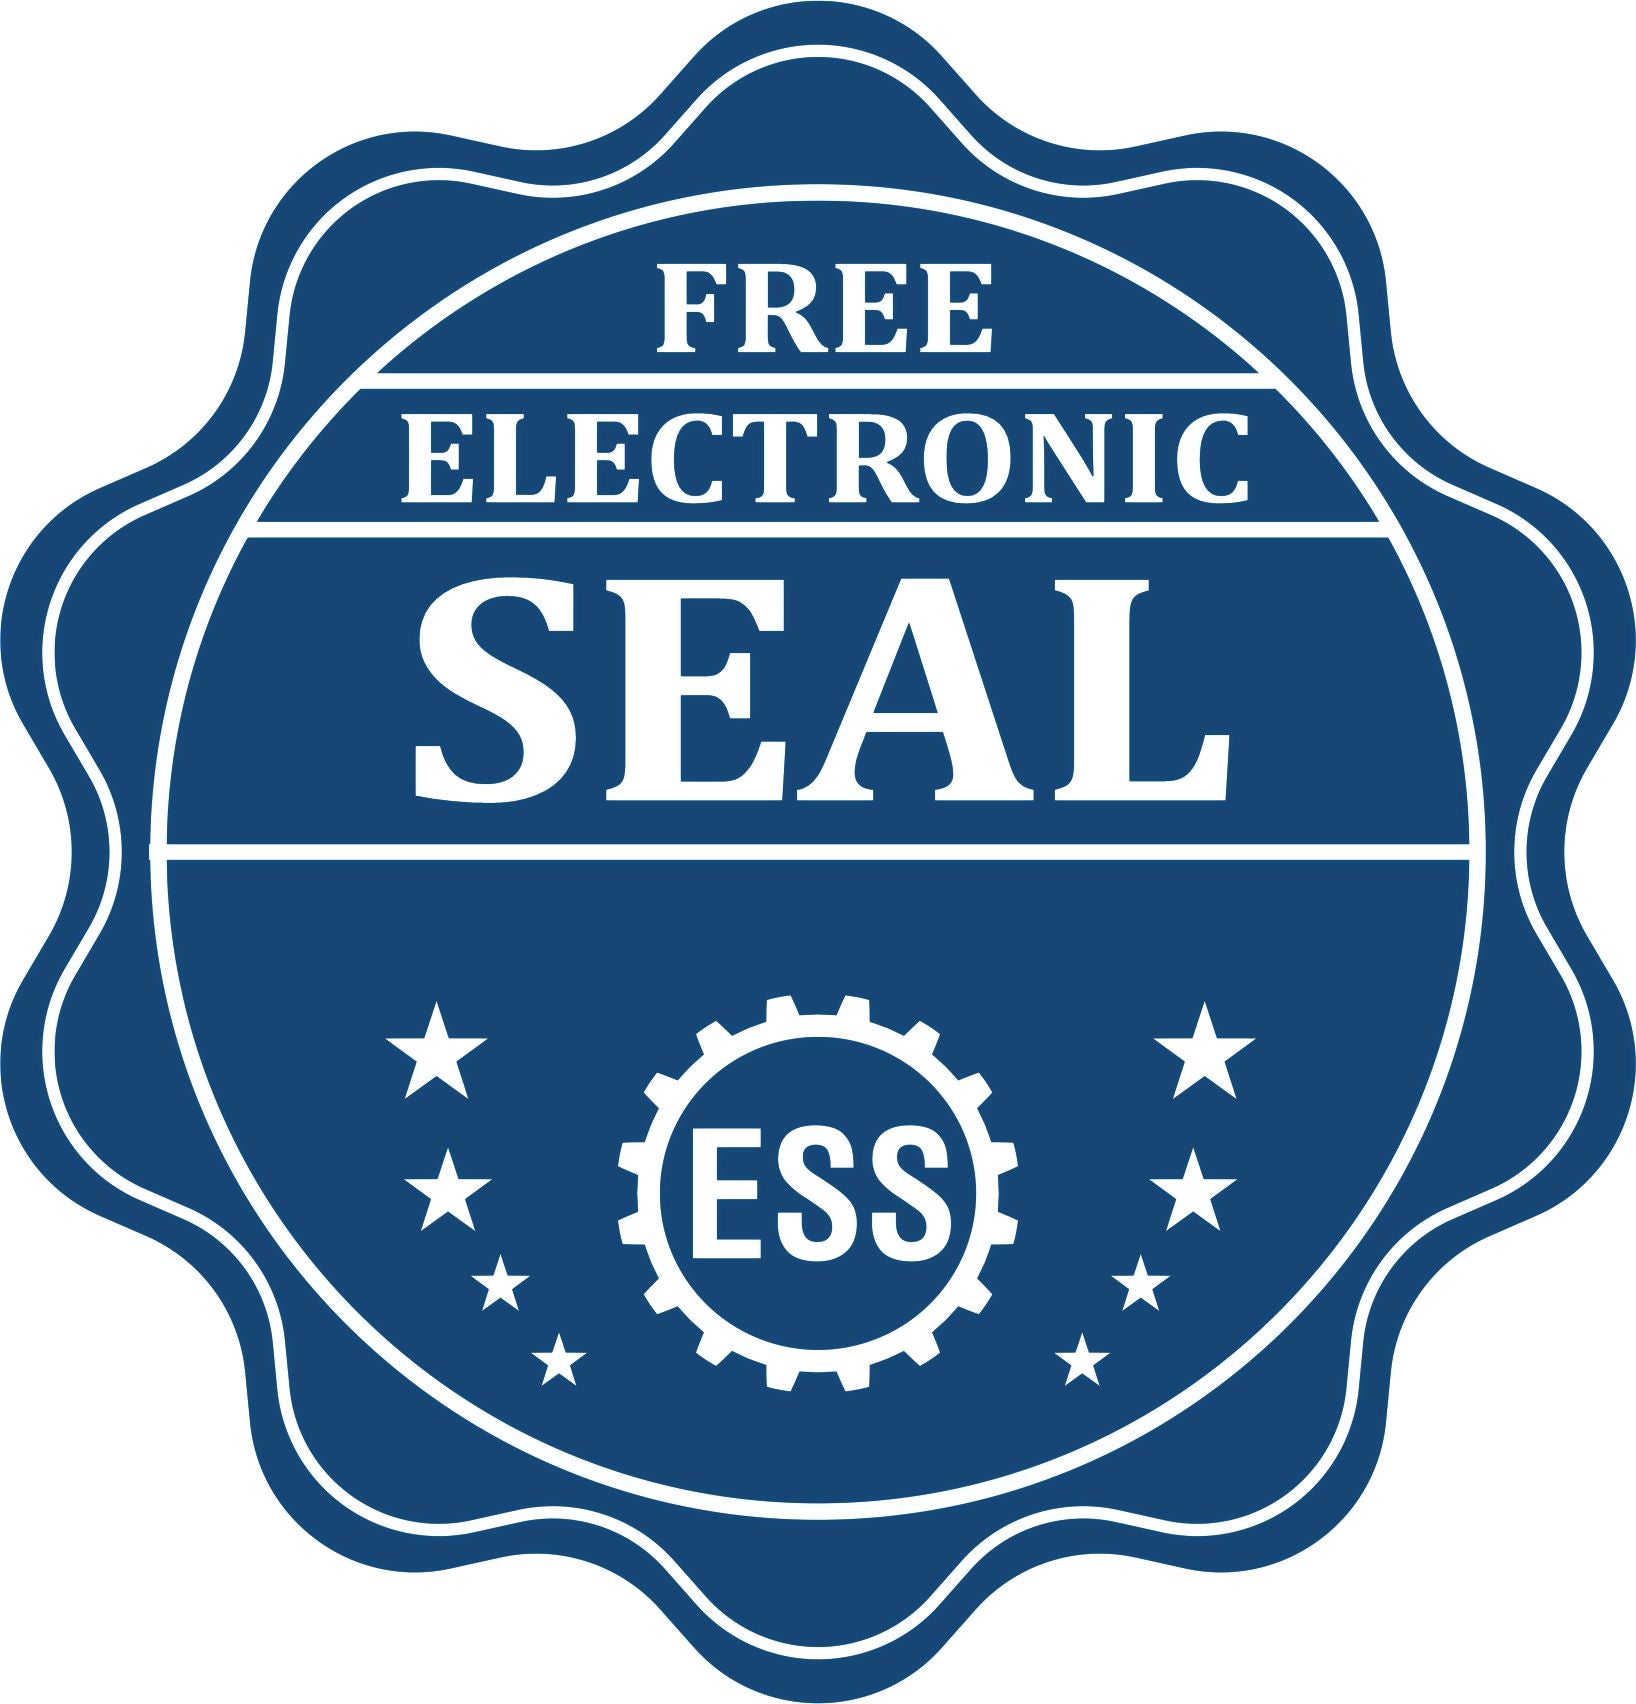 A badge showing a free electronic seal for the Heavy Duty Cast Iron Kansas Geologist Seal Embosser with stars and the ESS gear on the emblem.